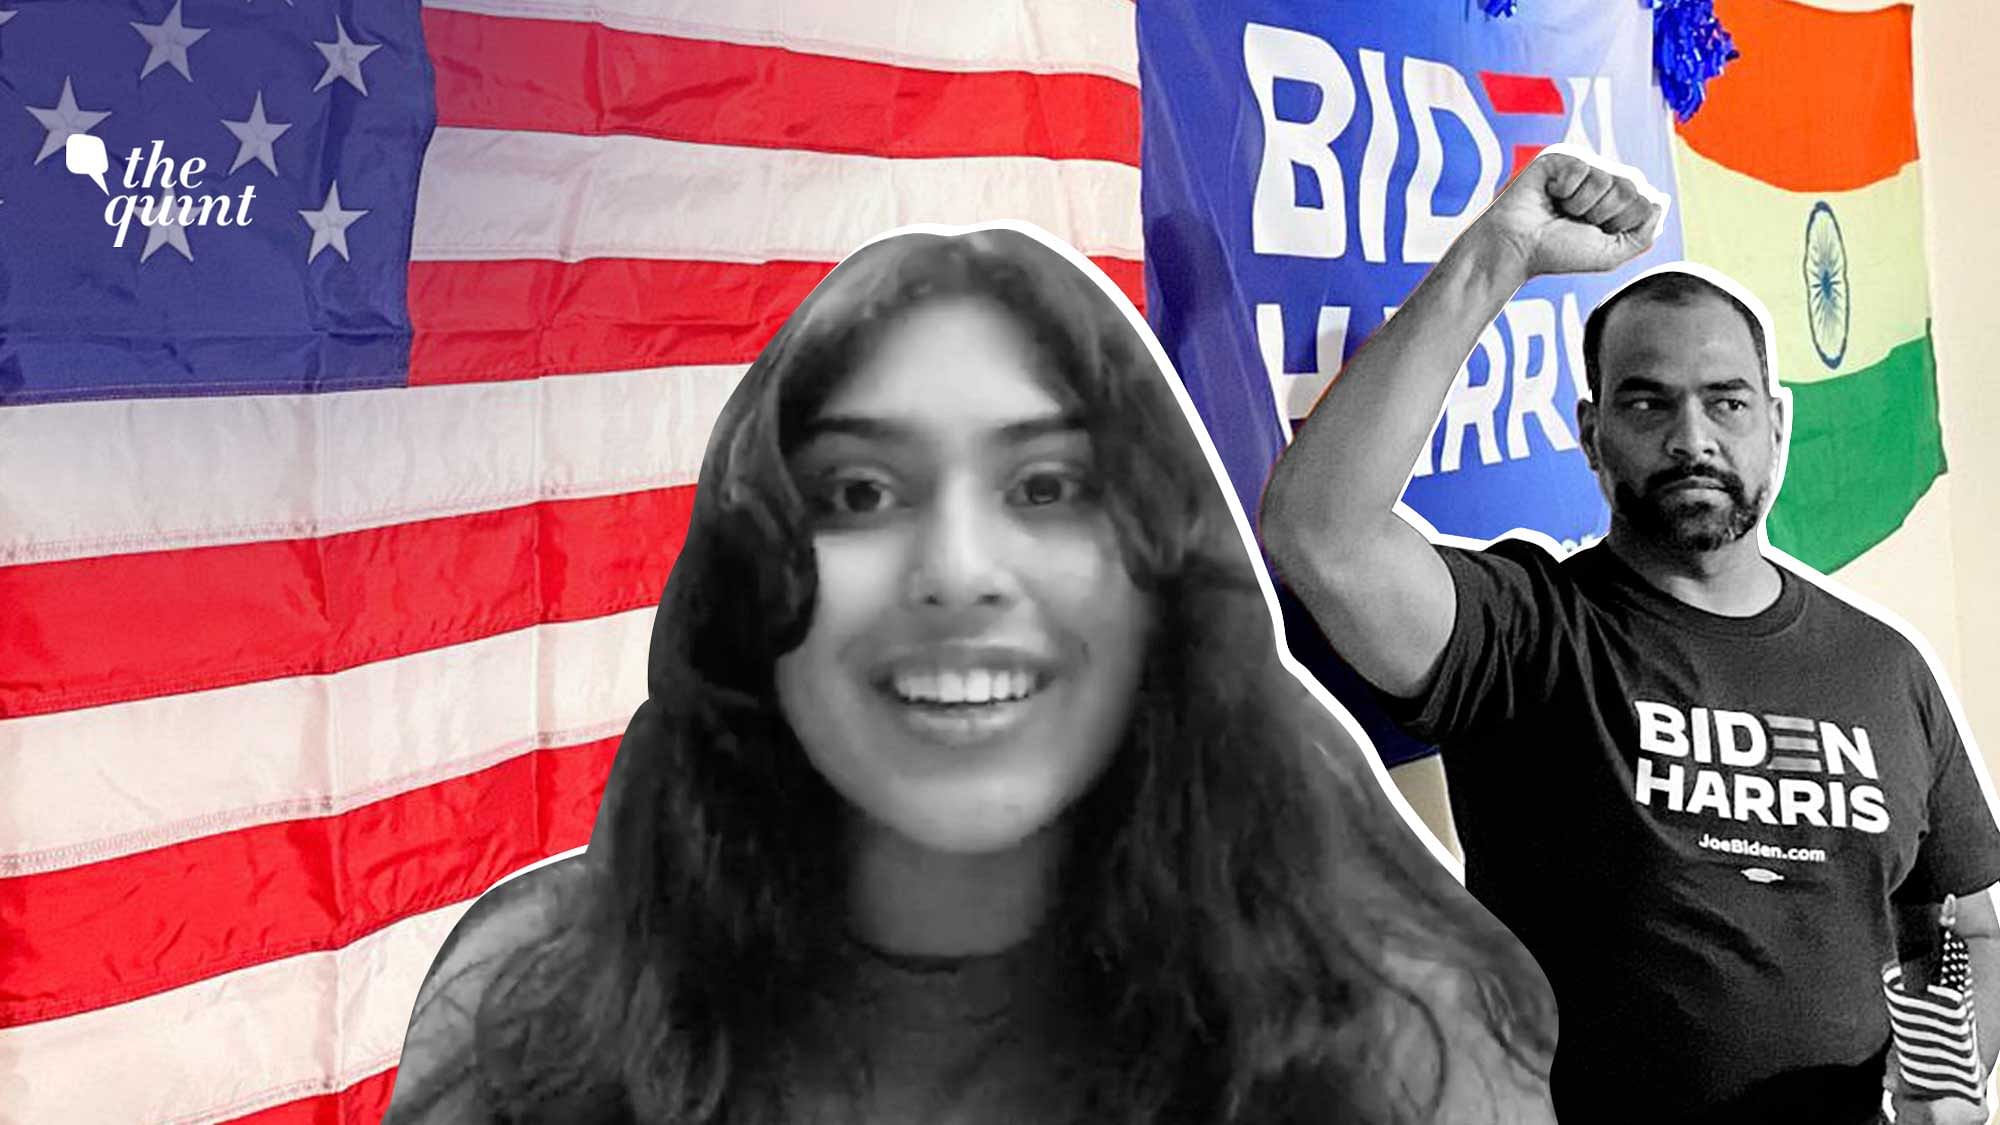 The clinking of drinks, honking of cars and the wajda of the dhol – here's how Indian-Americans celebrated the big win of Joe Biden and Kamala Harris.